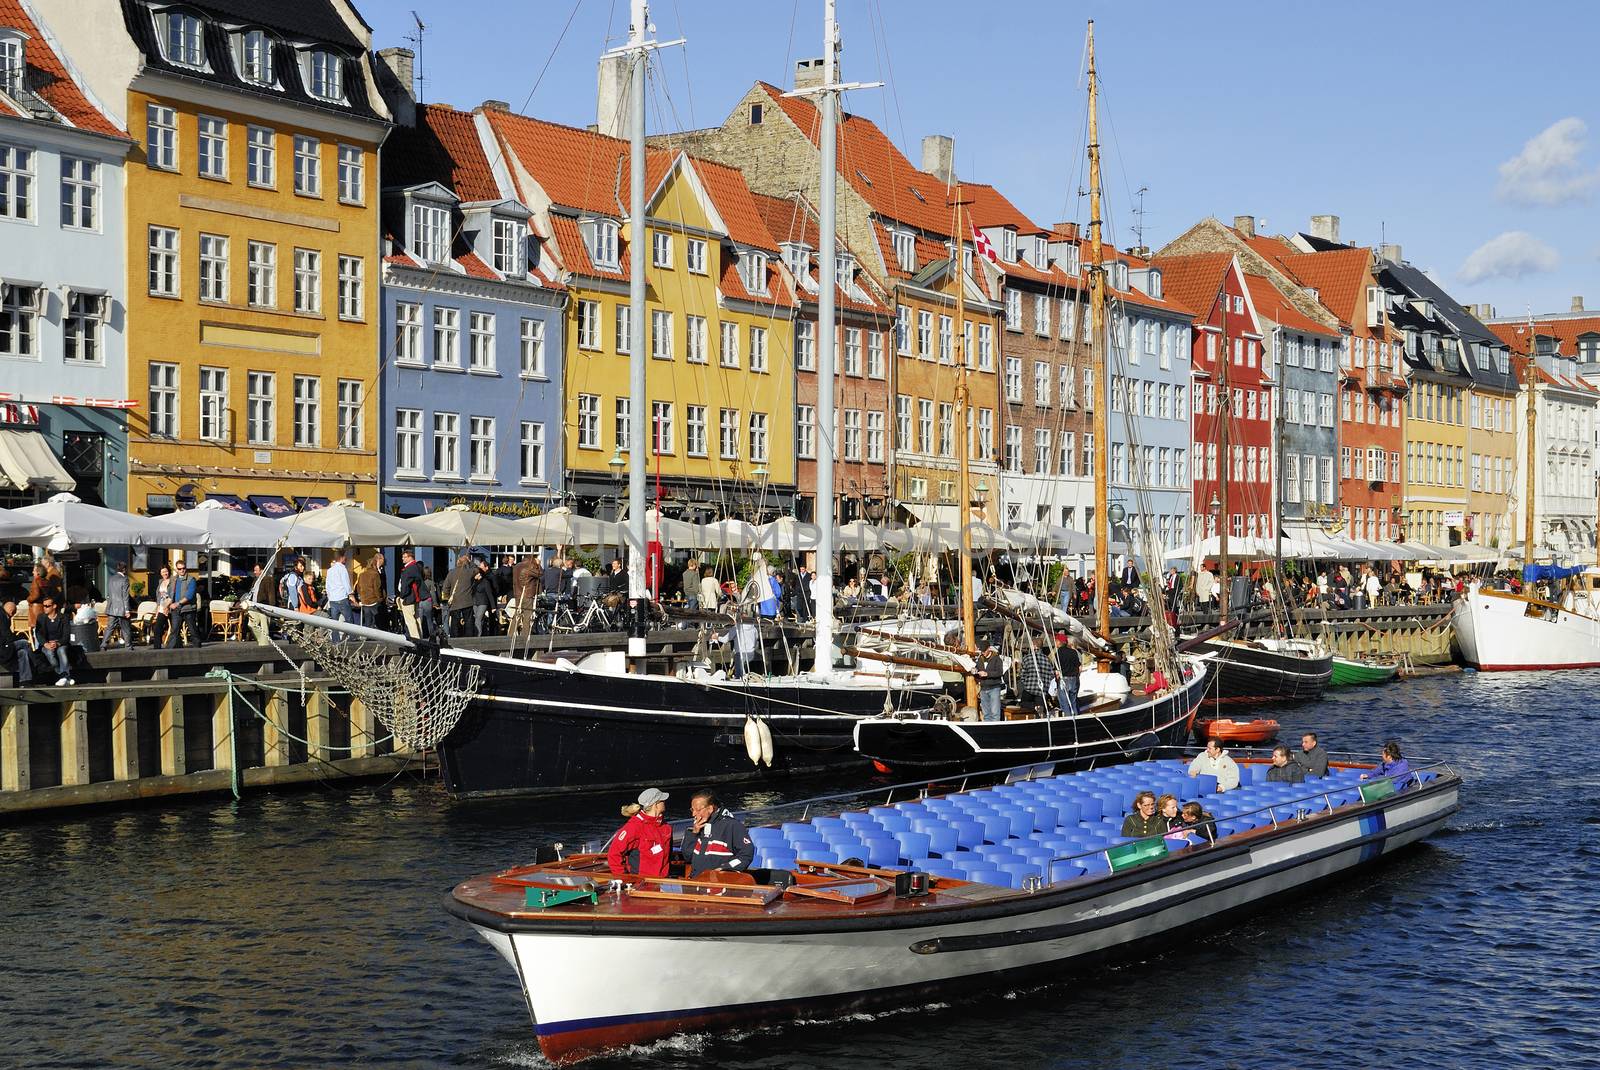 Nyhavn in Copenhagen, Denmark - one of the most popular tourist places. Visit also lightbox of high quality photos of Scandinavia